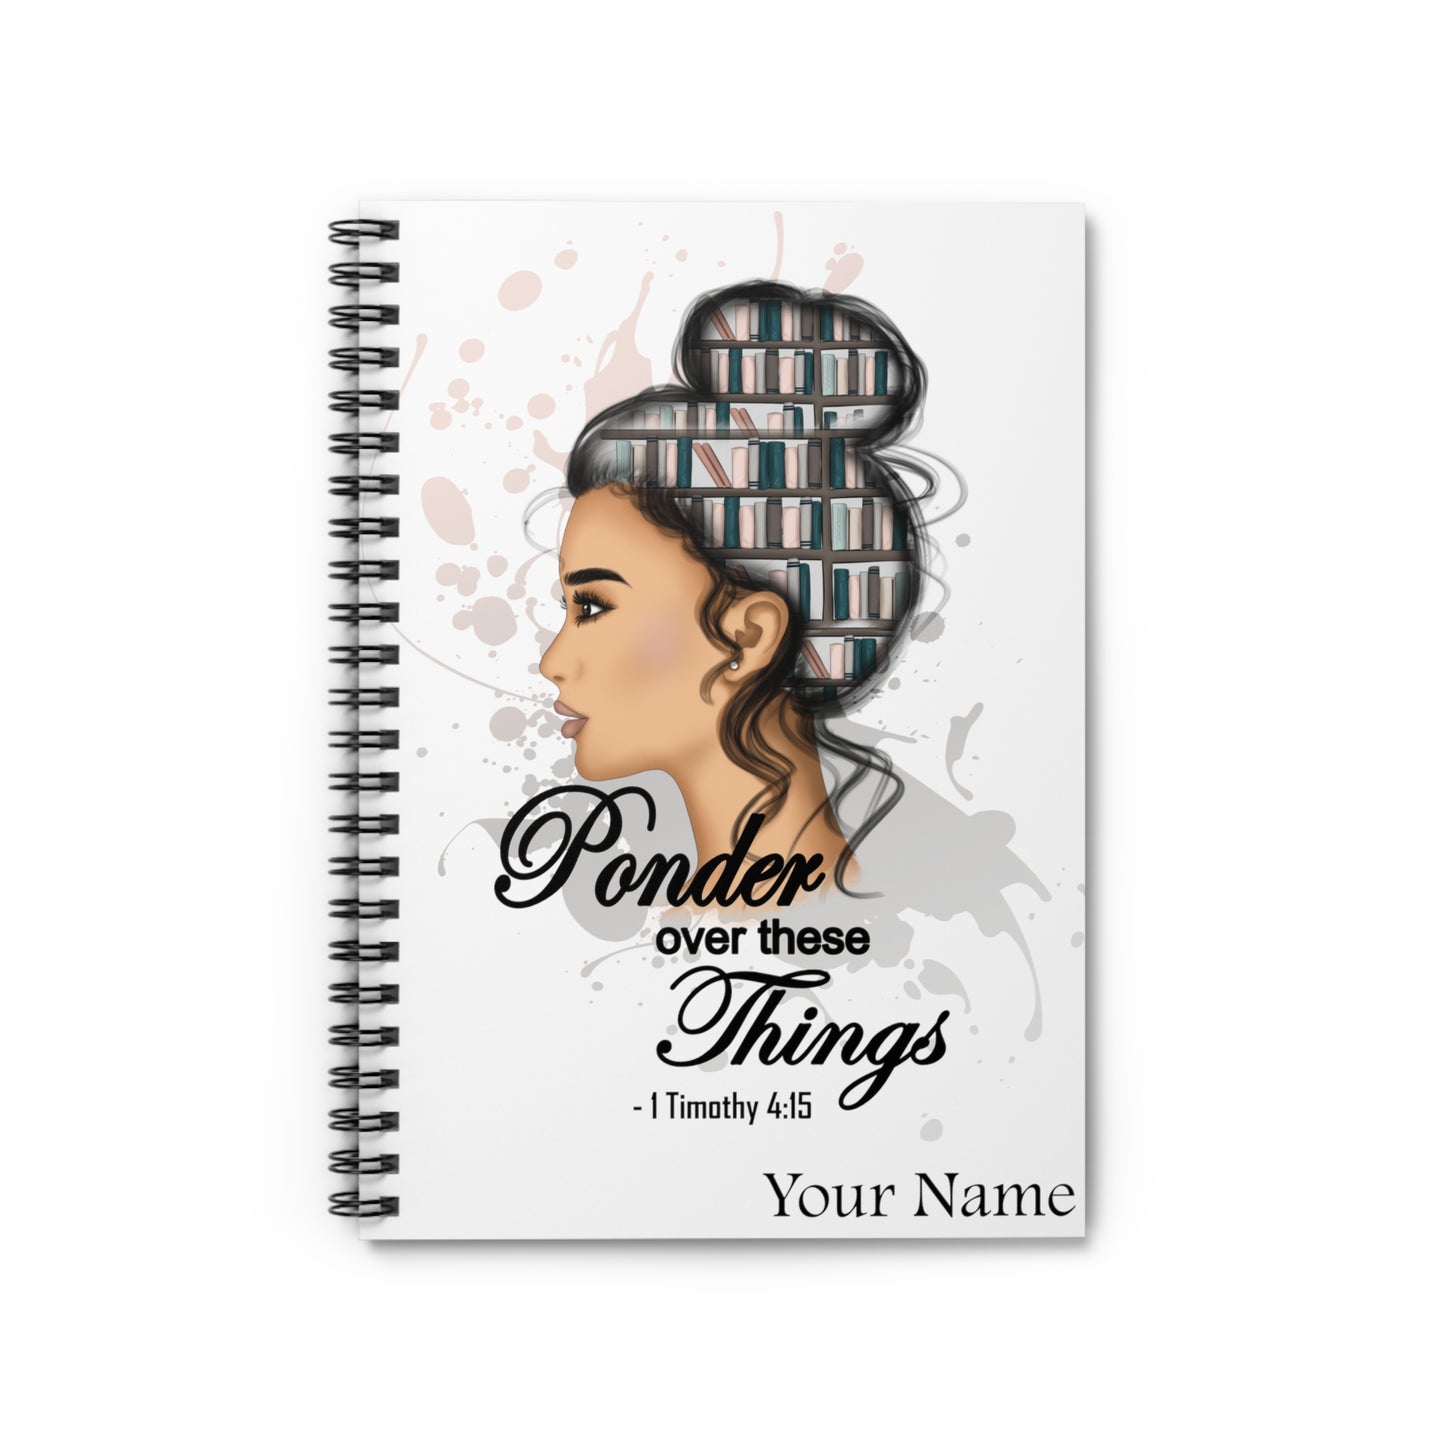 Ponder over these things notebook - Ruled Line